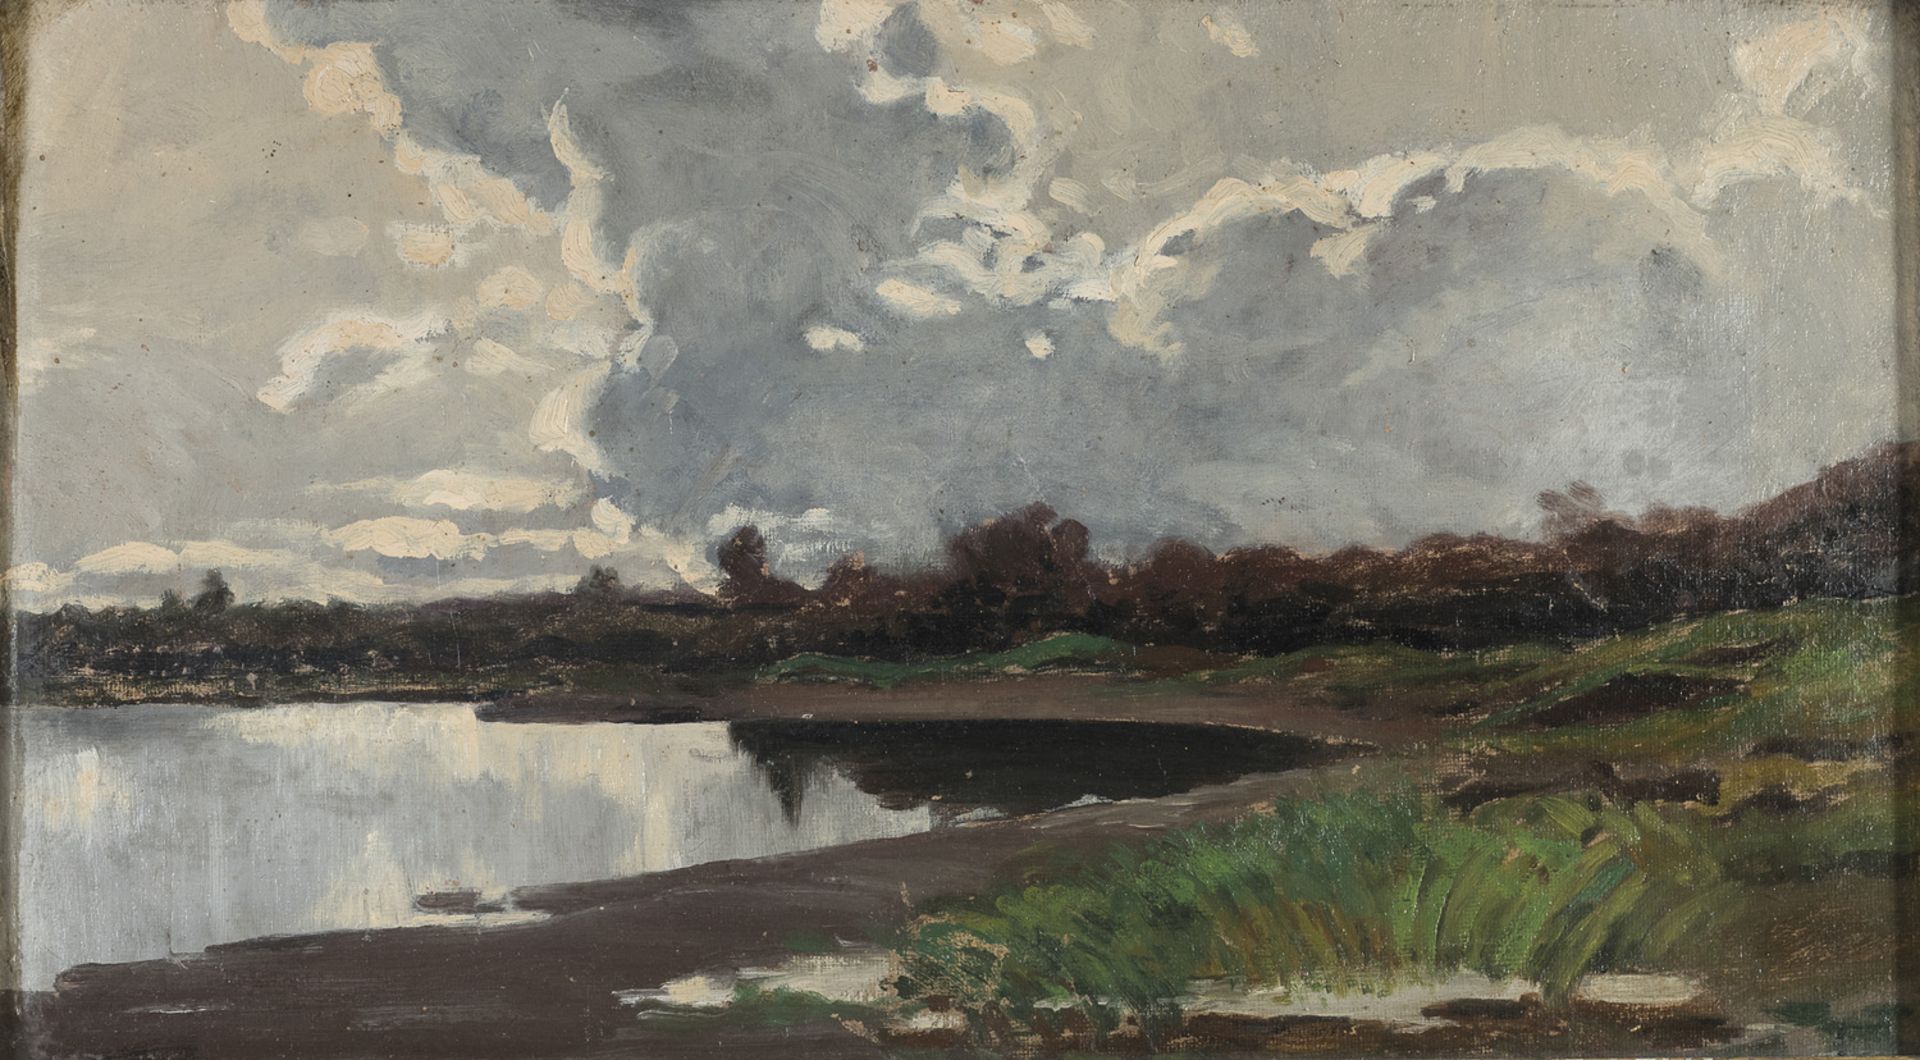 OIL PAINTING OF A LAGOON LANDSCAPE 19TH CENTURY